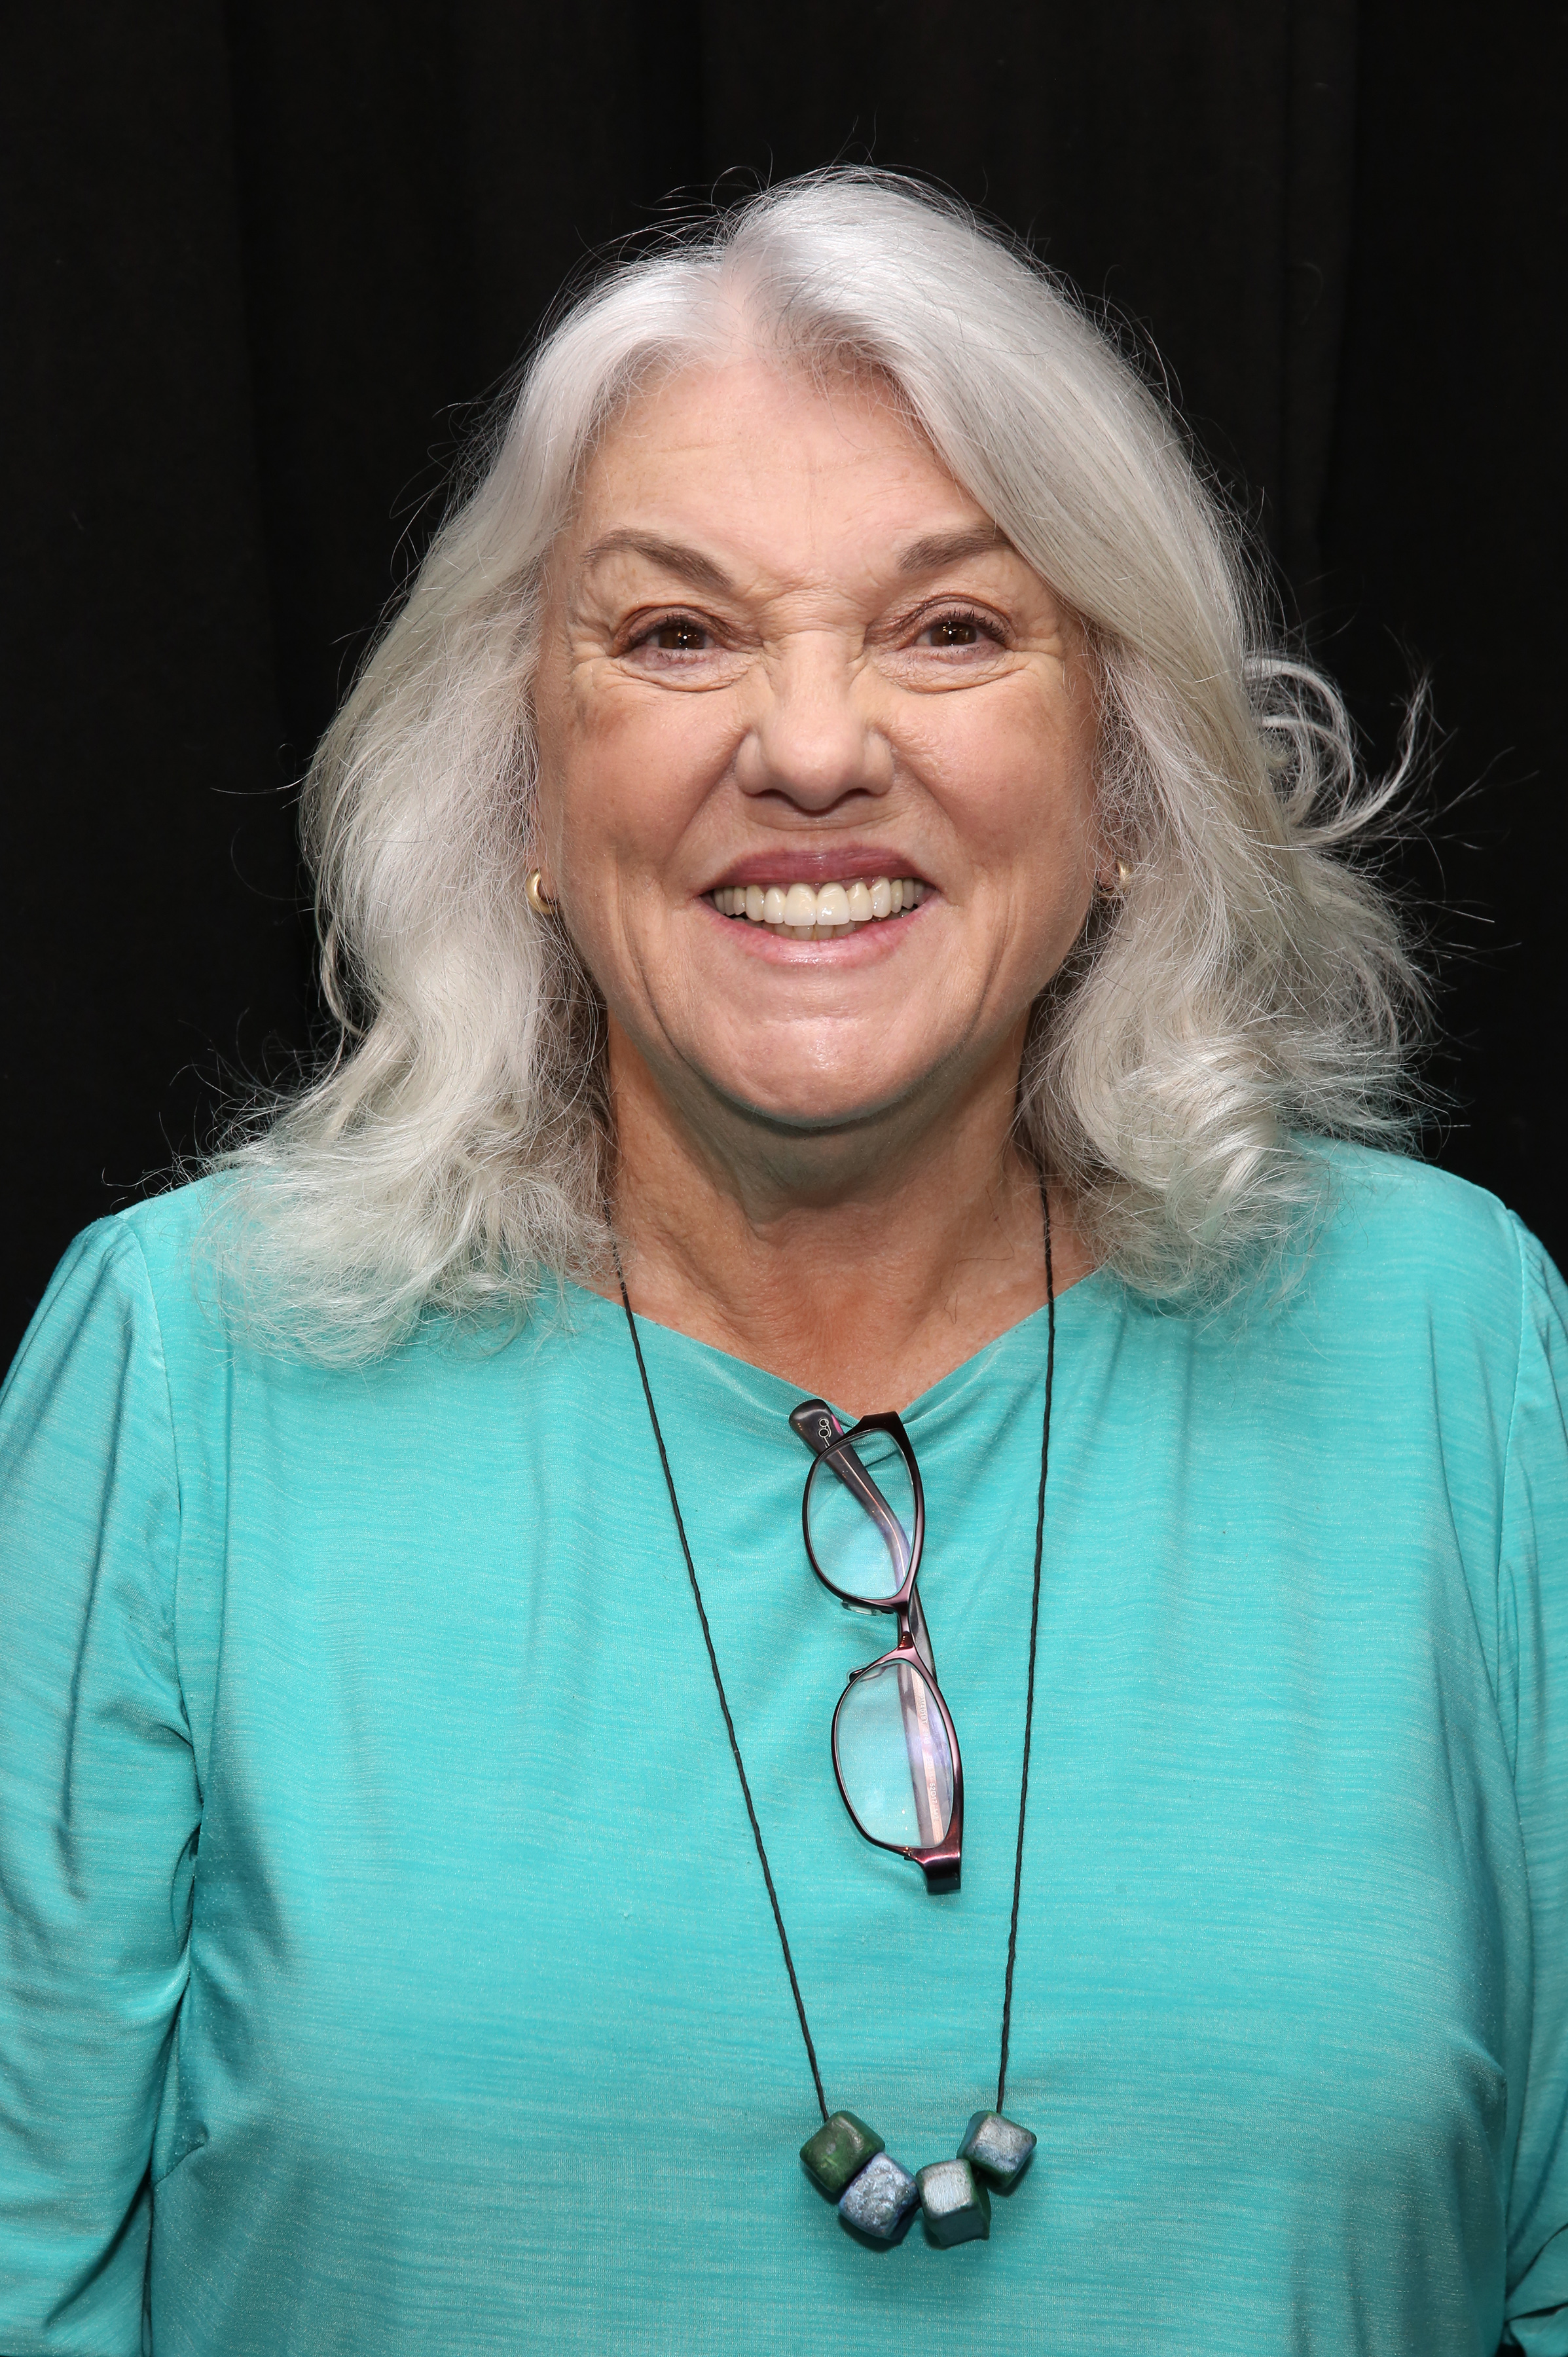 Tyne Daly attends the photo call for The Dorset Theatre Festival world premiere of Theresa Rebeck's 'Downstairs' at Actors Connection on May 10, 2017 in New York City. | Source: Getty Images